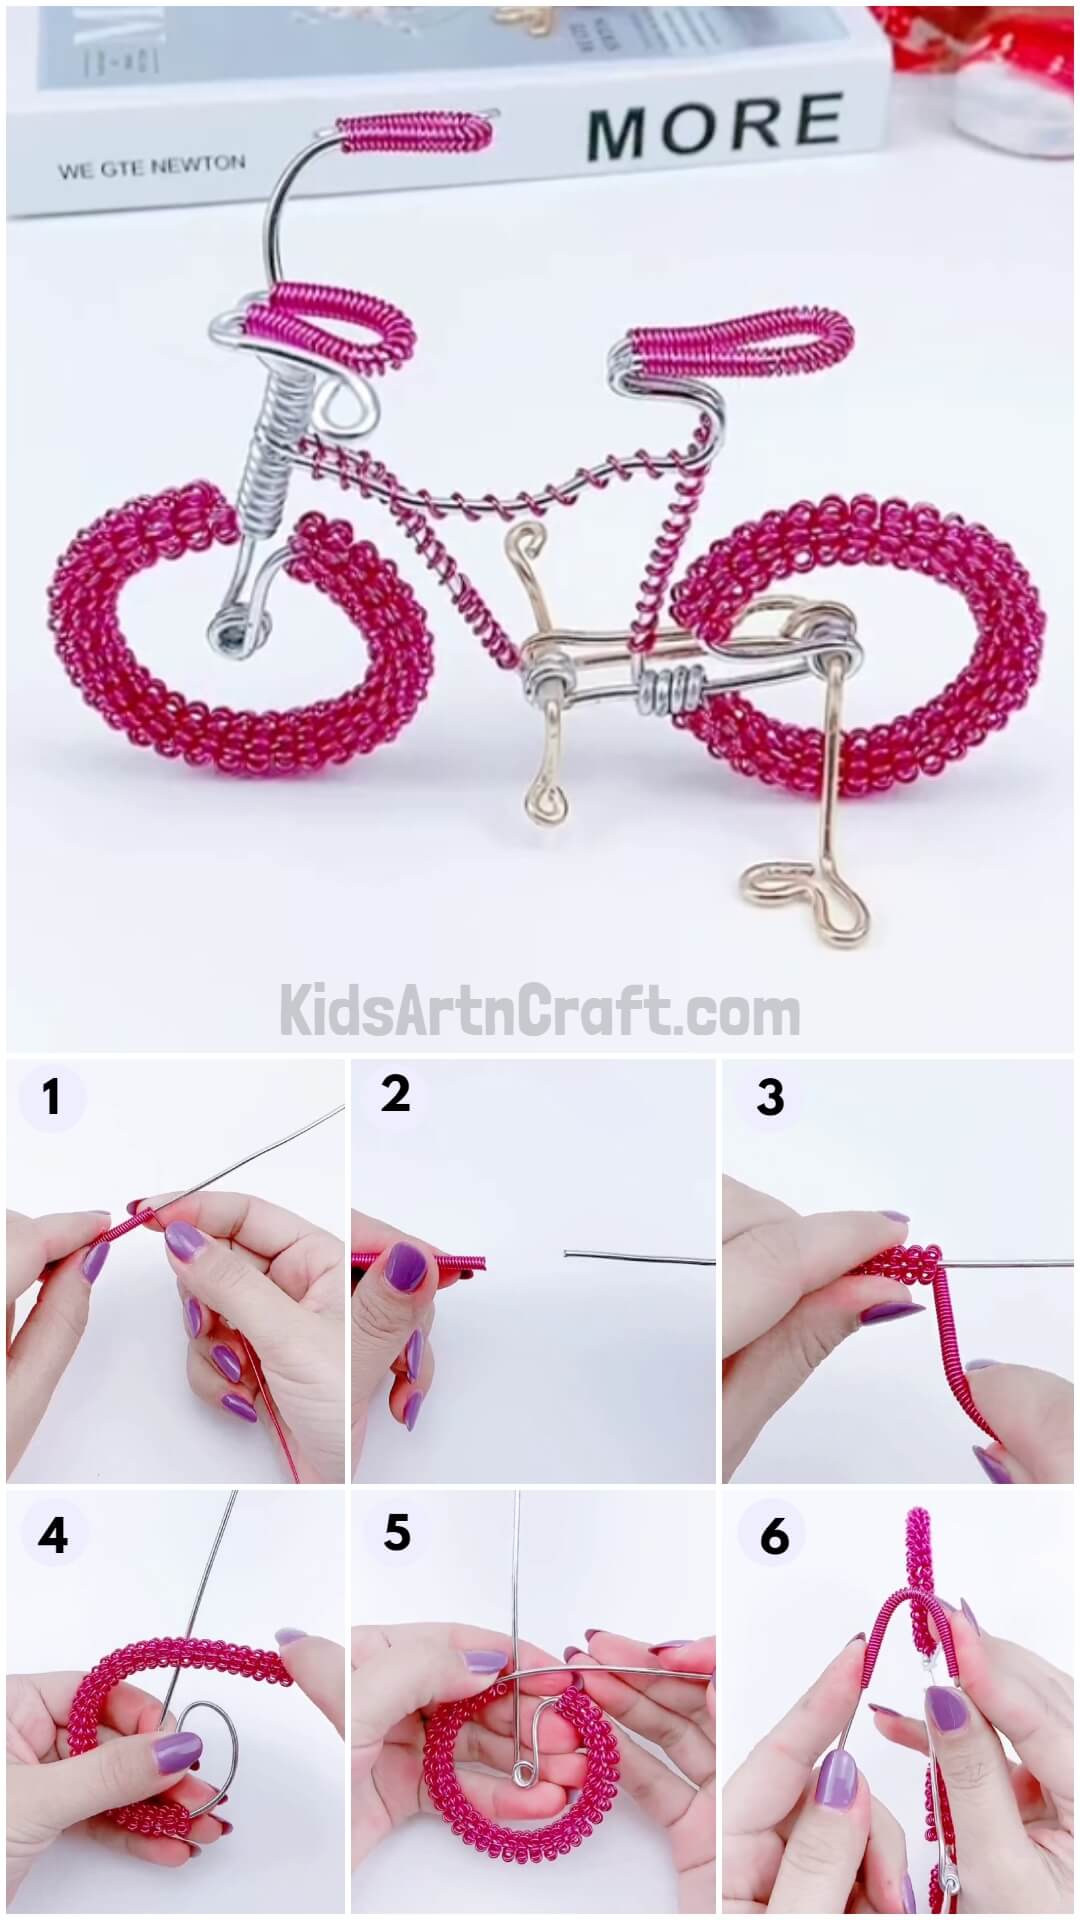 Handmade Metal Bike Toy Craft Step by Step Instructions